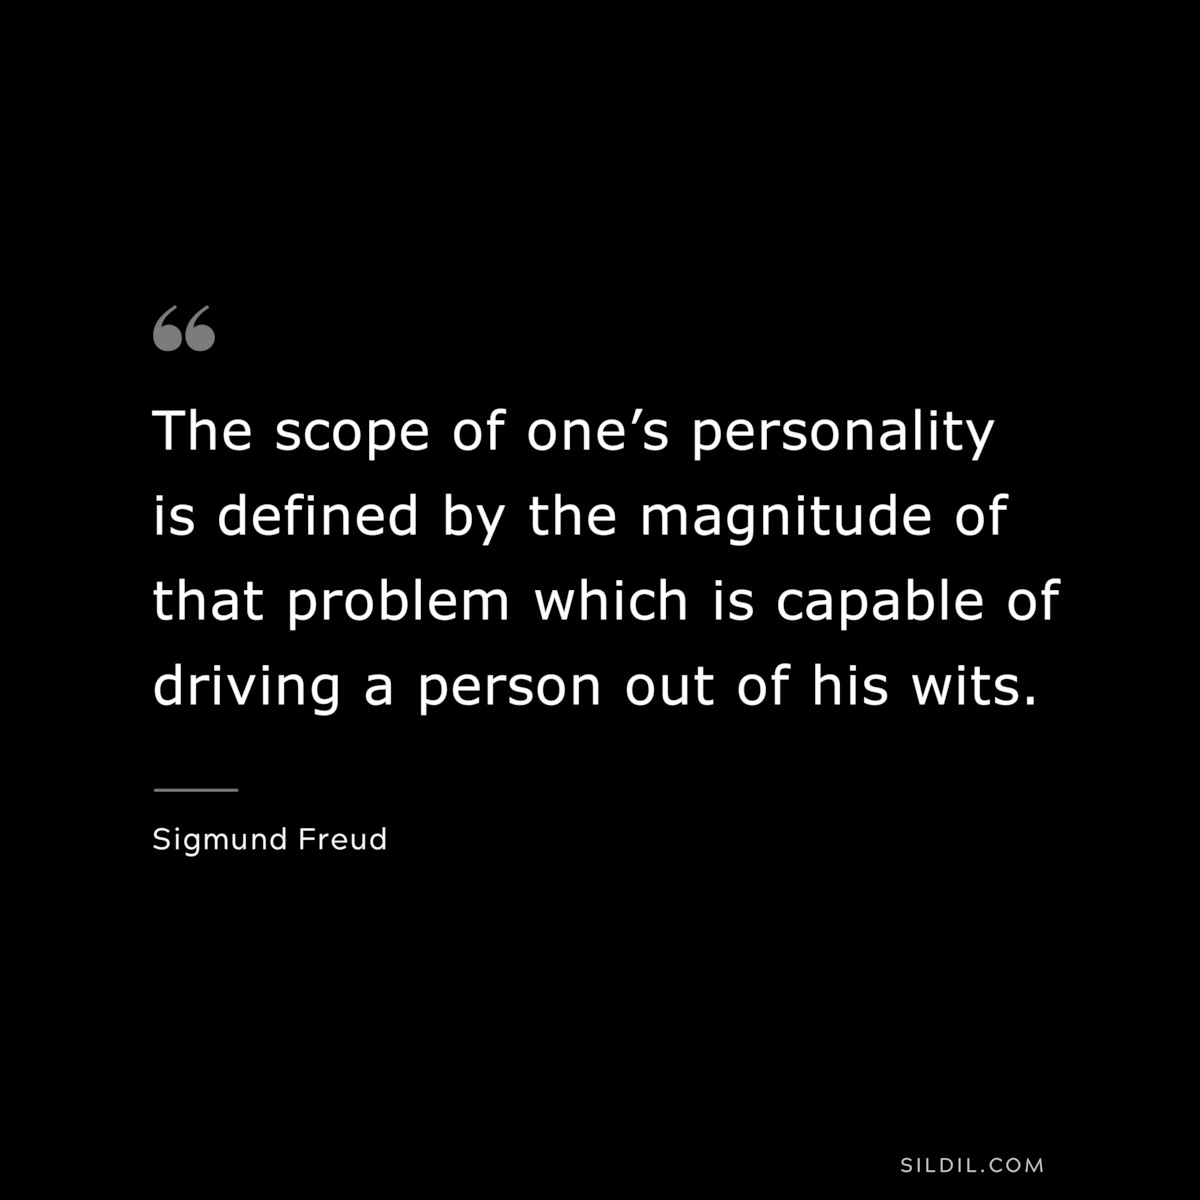 The scope of one’s personality is defined by the magnitude of that problem which is capable of driving a person out of his wits. ― Sigmund Frued